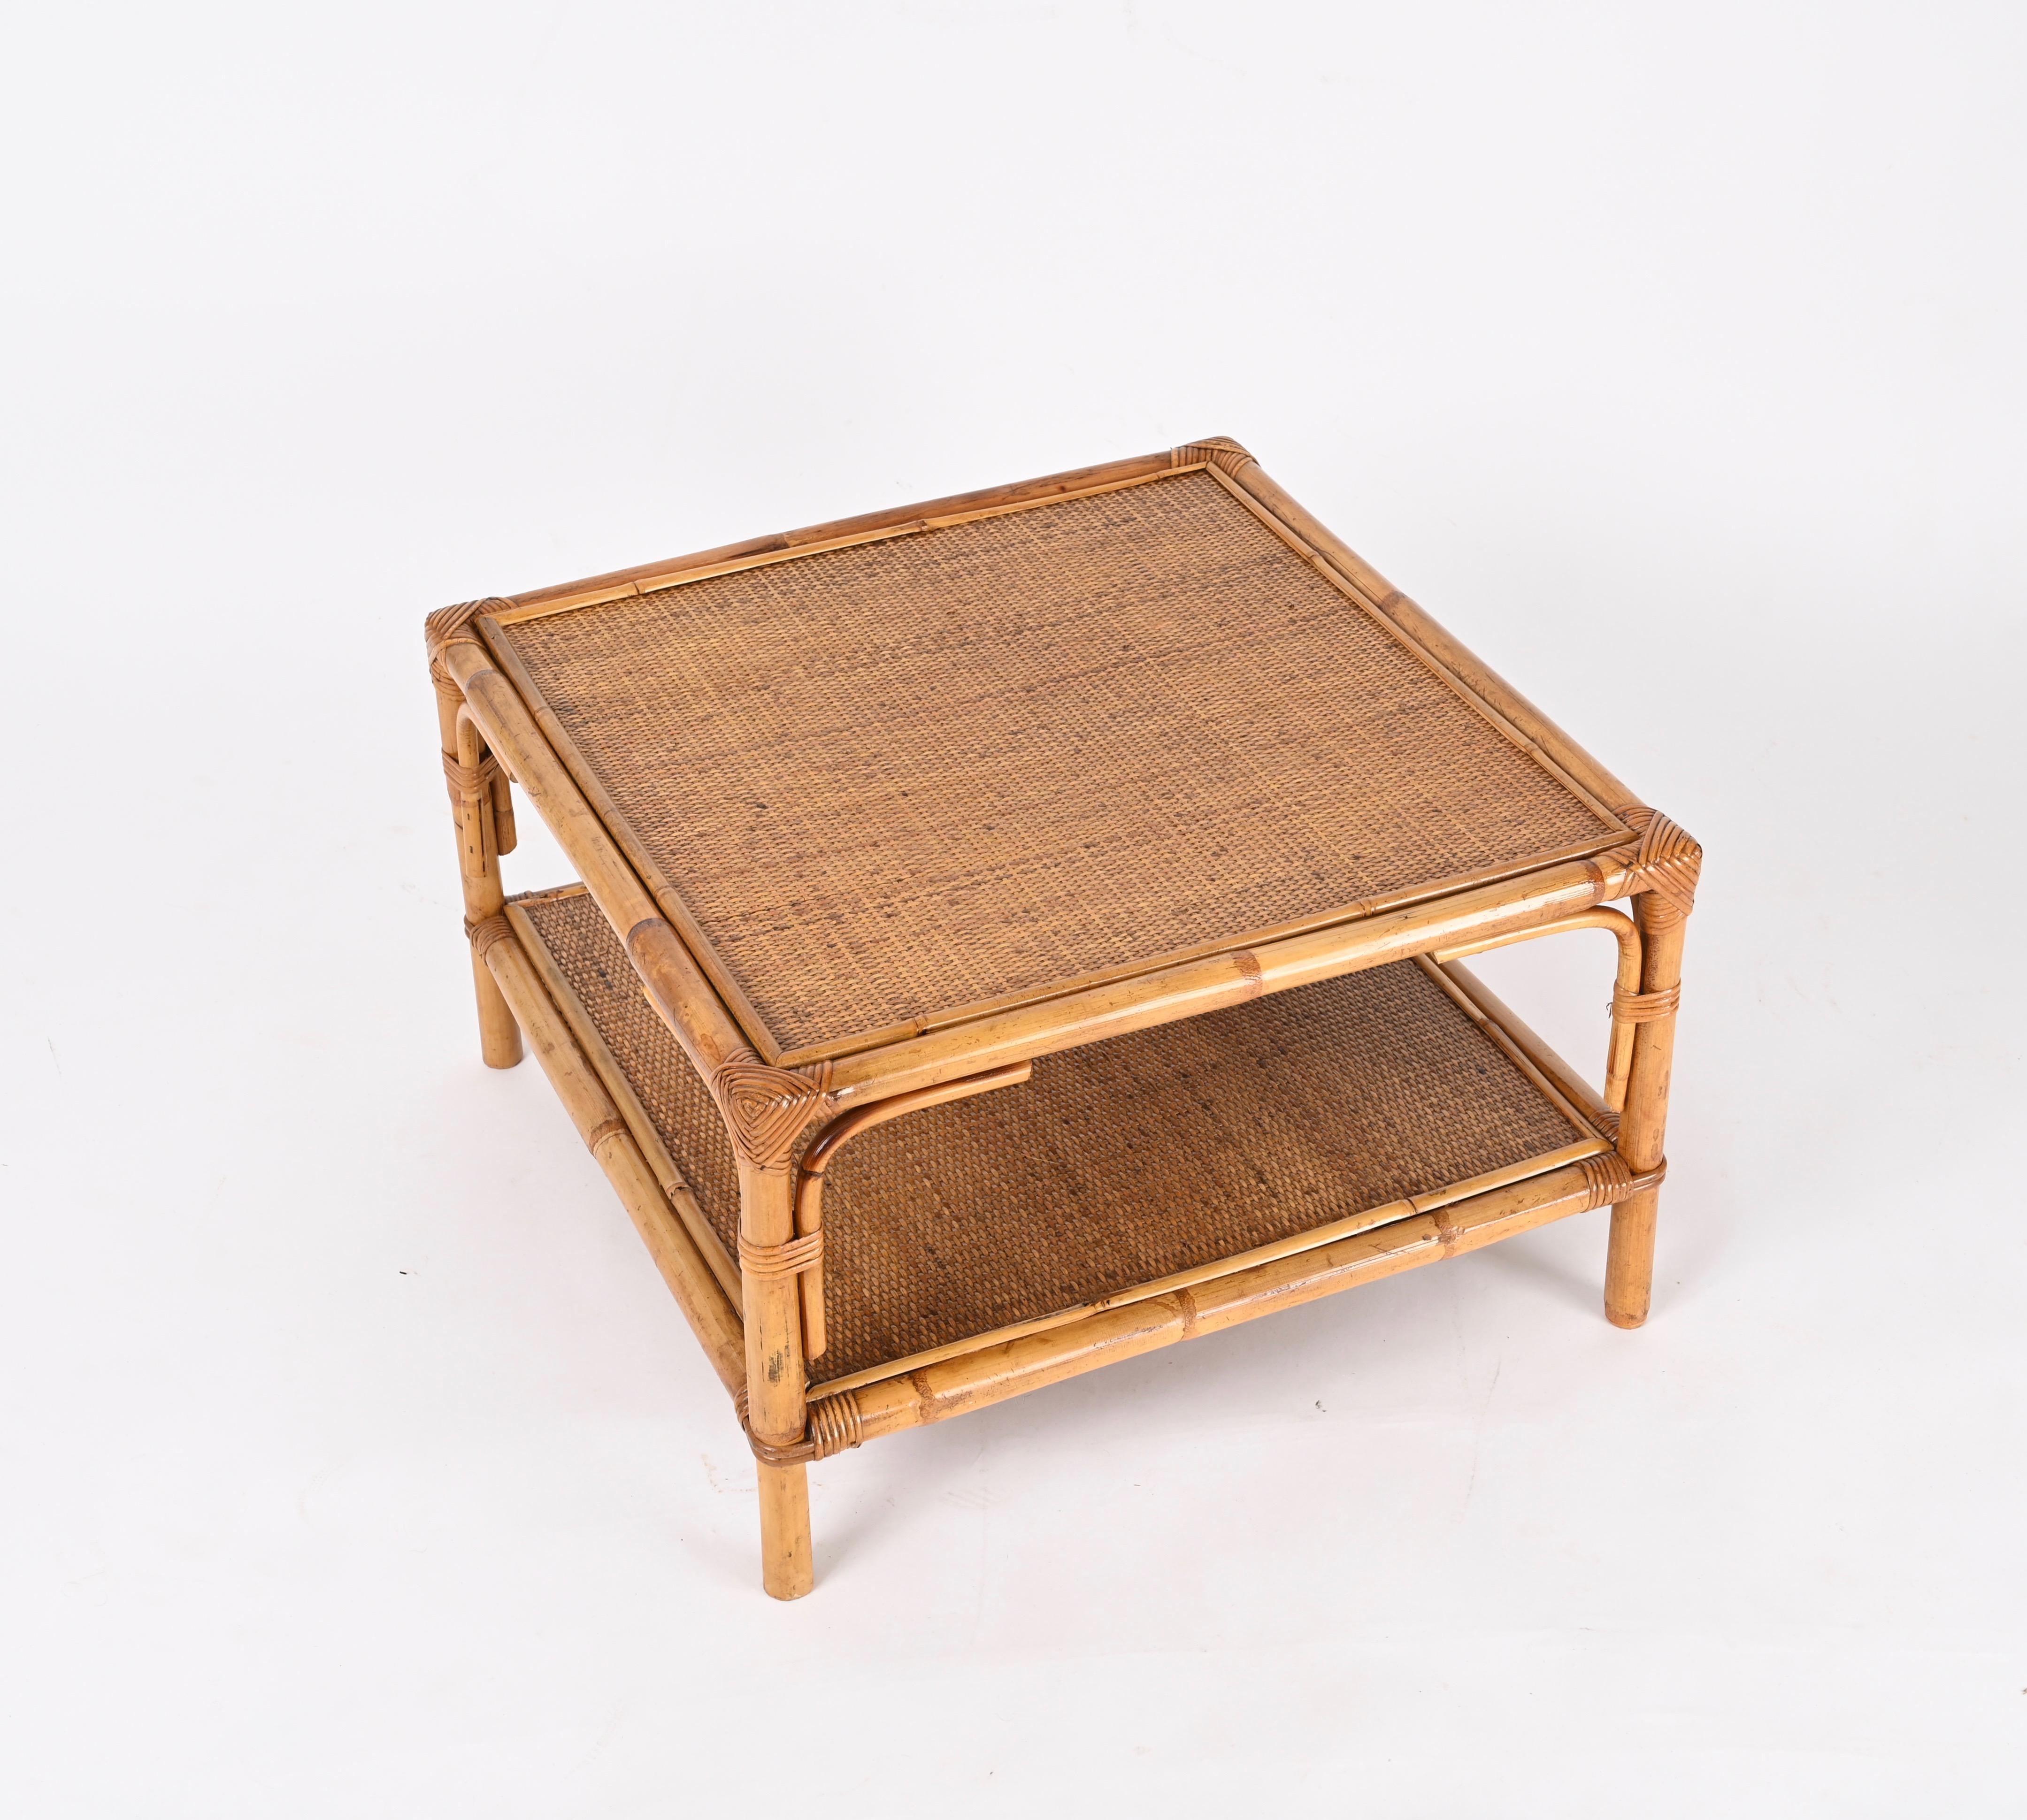 Vivai del Sud Midcentury Italian Square Coffee Table in Bamboo and Rattan, 1970s For Sale 4